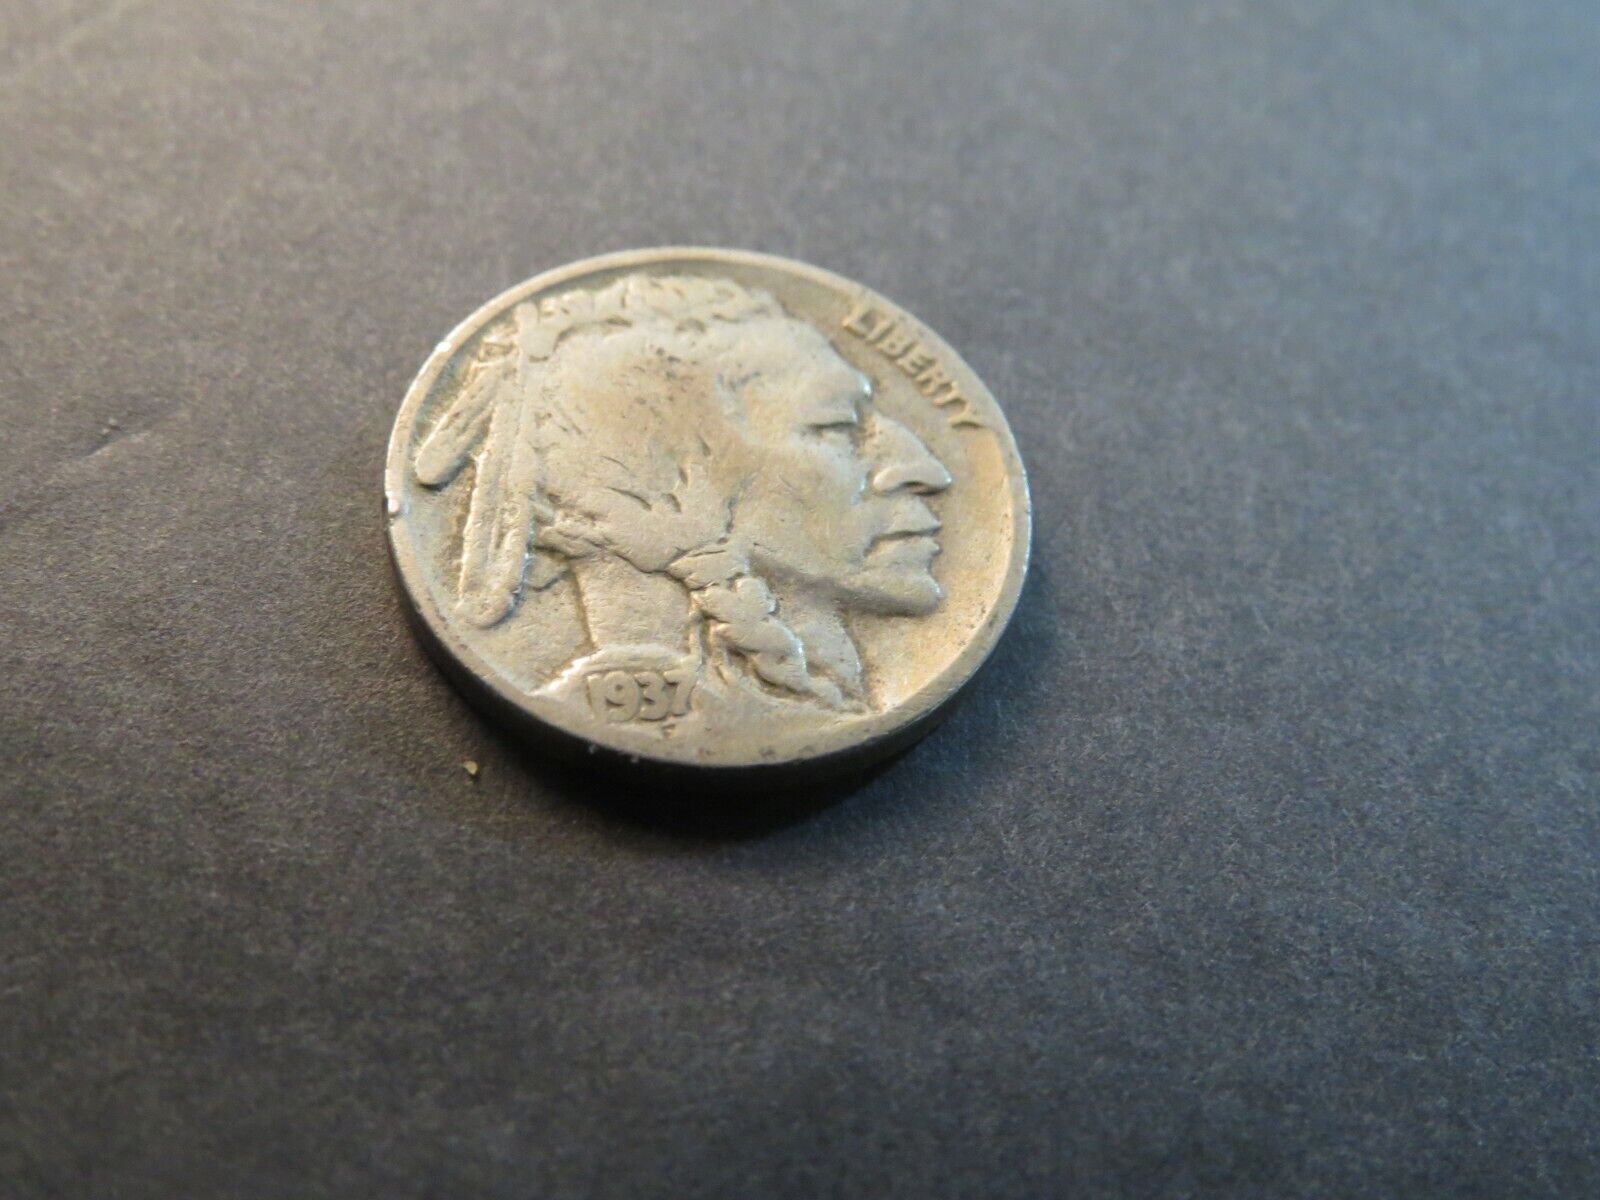 1937 Buffalo Nickel - Free Shipping - Actual coin pictured -F8